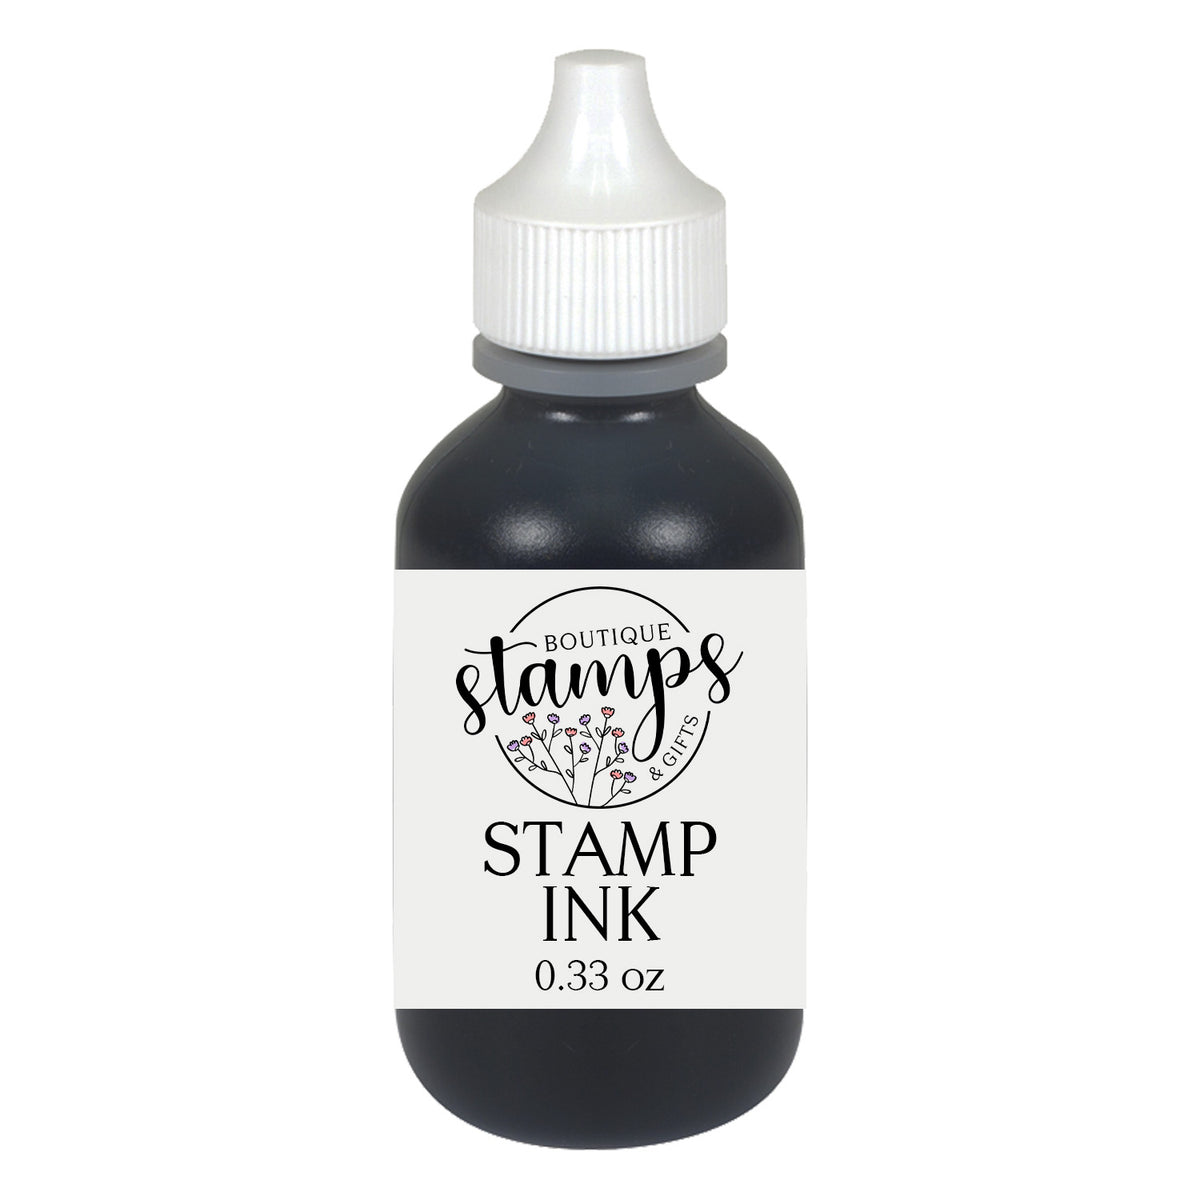 Ink for Self-Inking Stamps